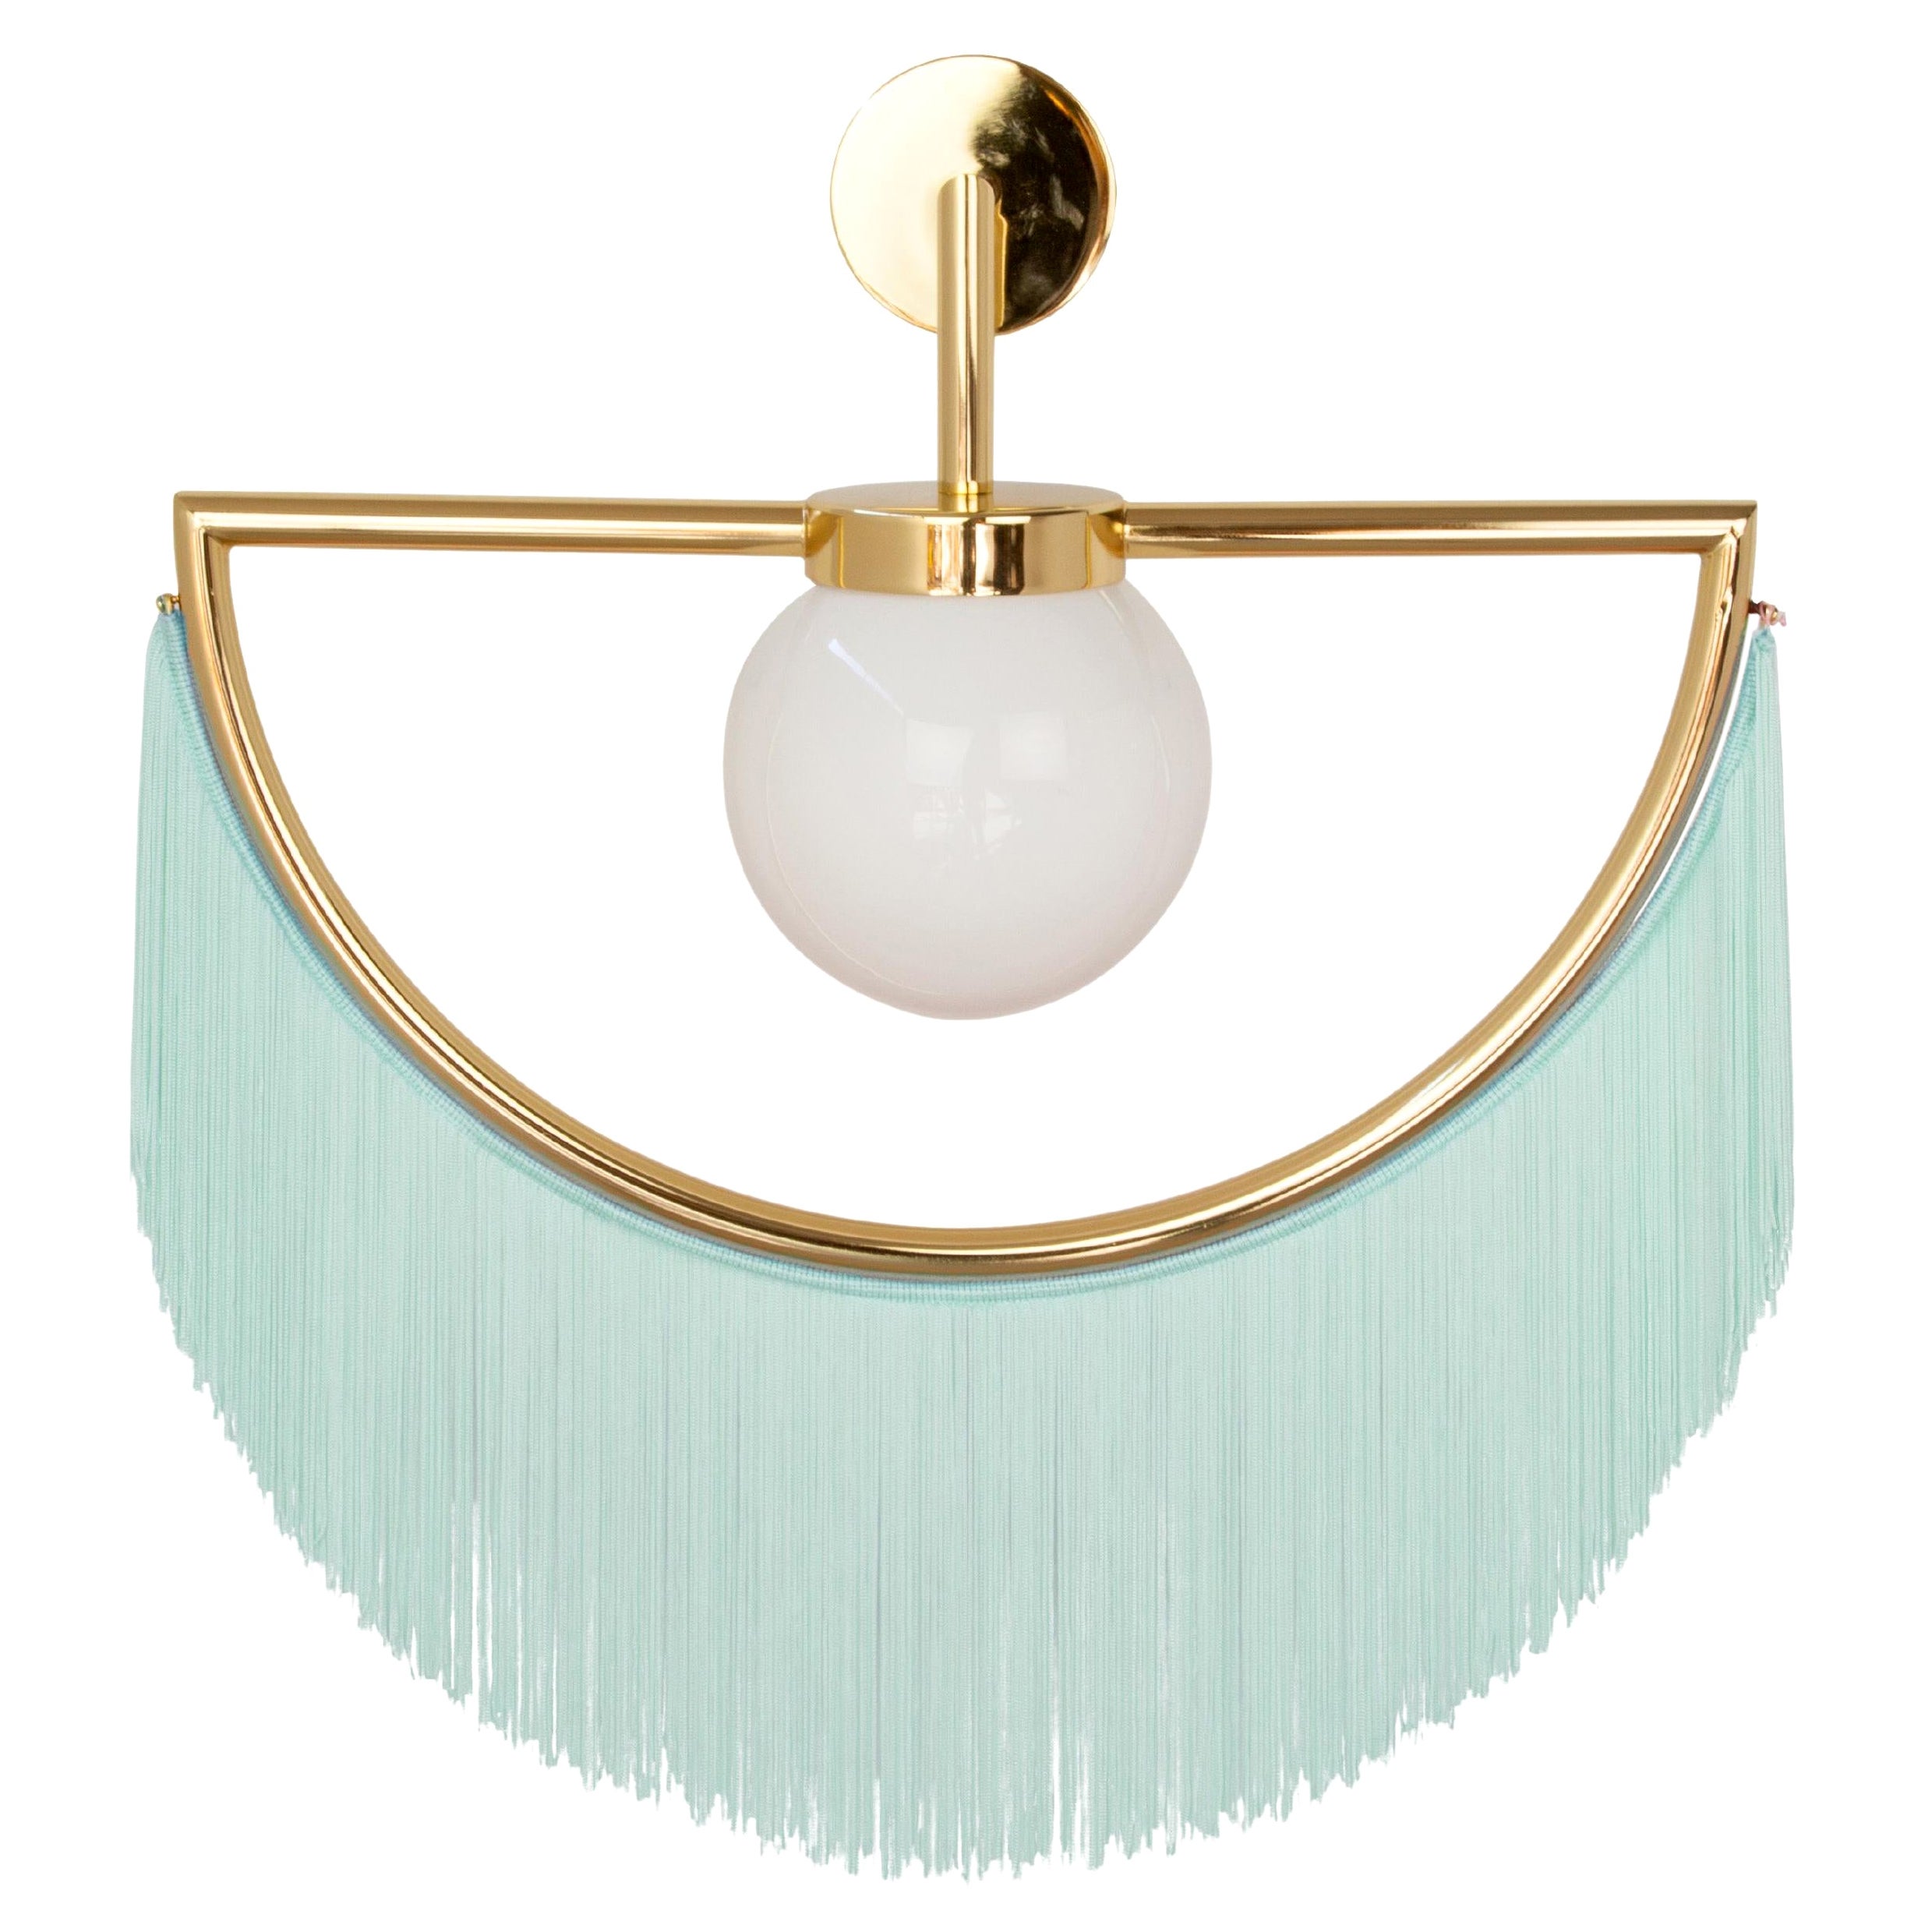 Wink Wall Lamp Large by Houtique, Mint